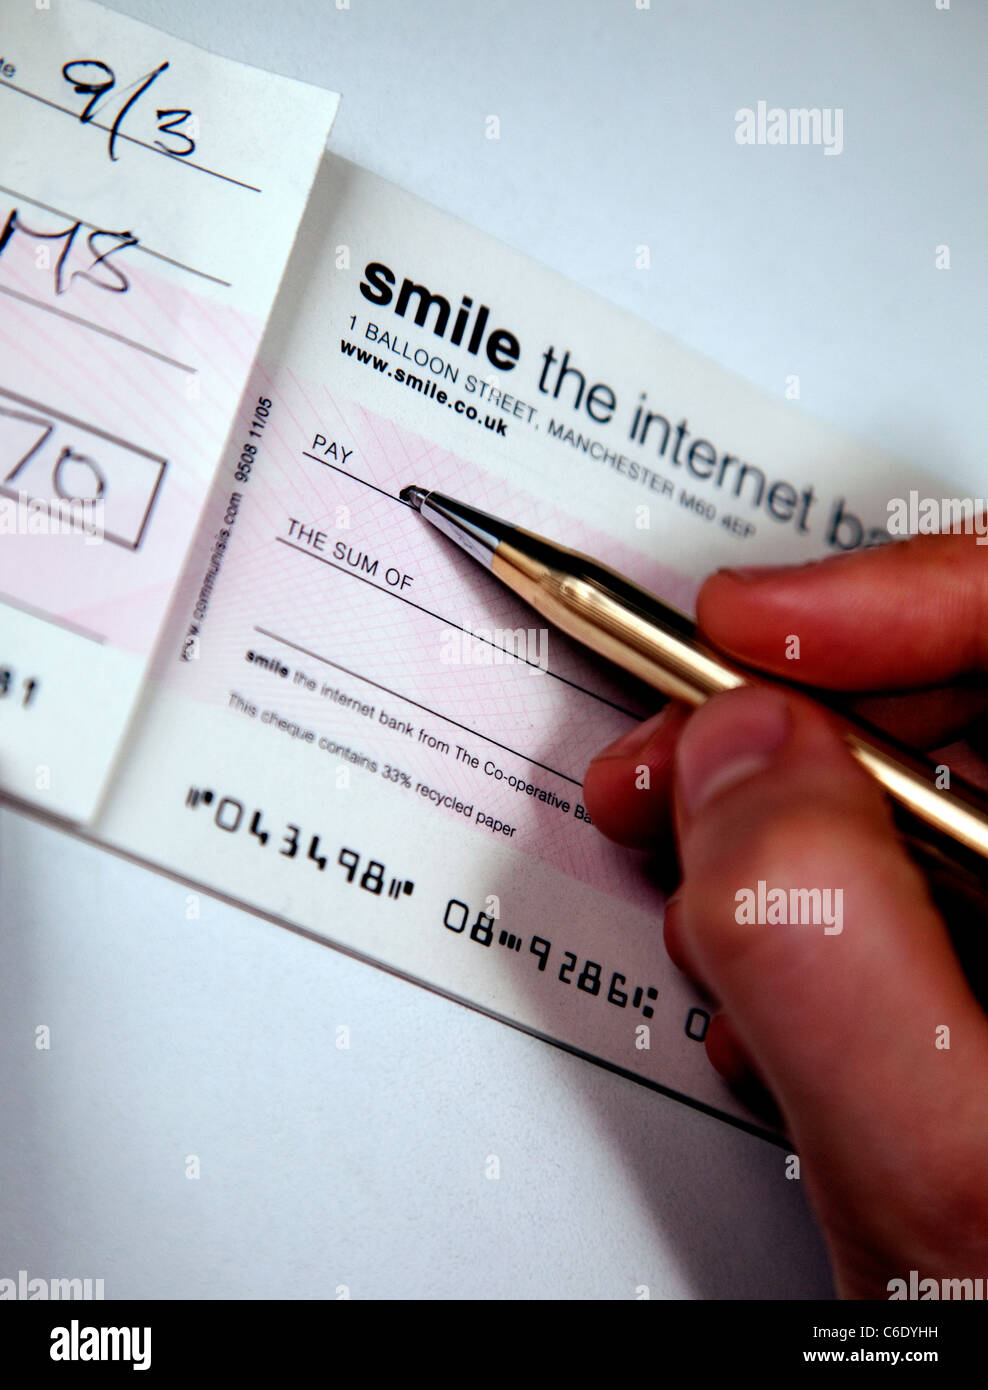 Writing a cheque, London Stock Photo